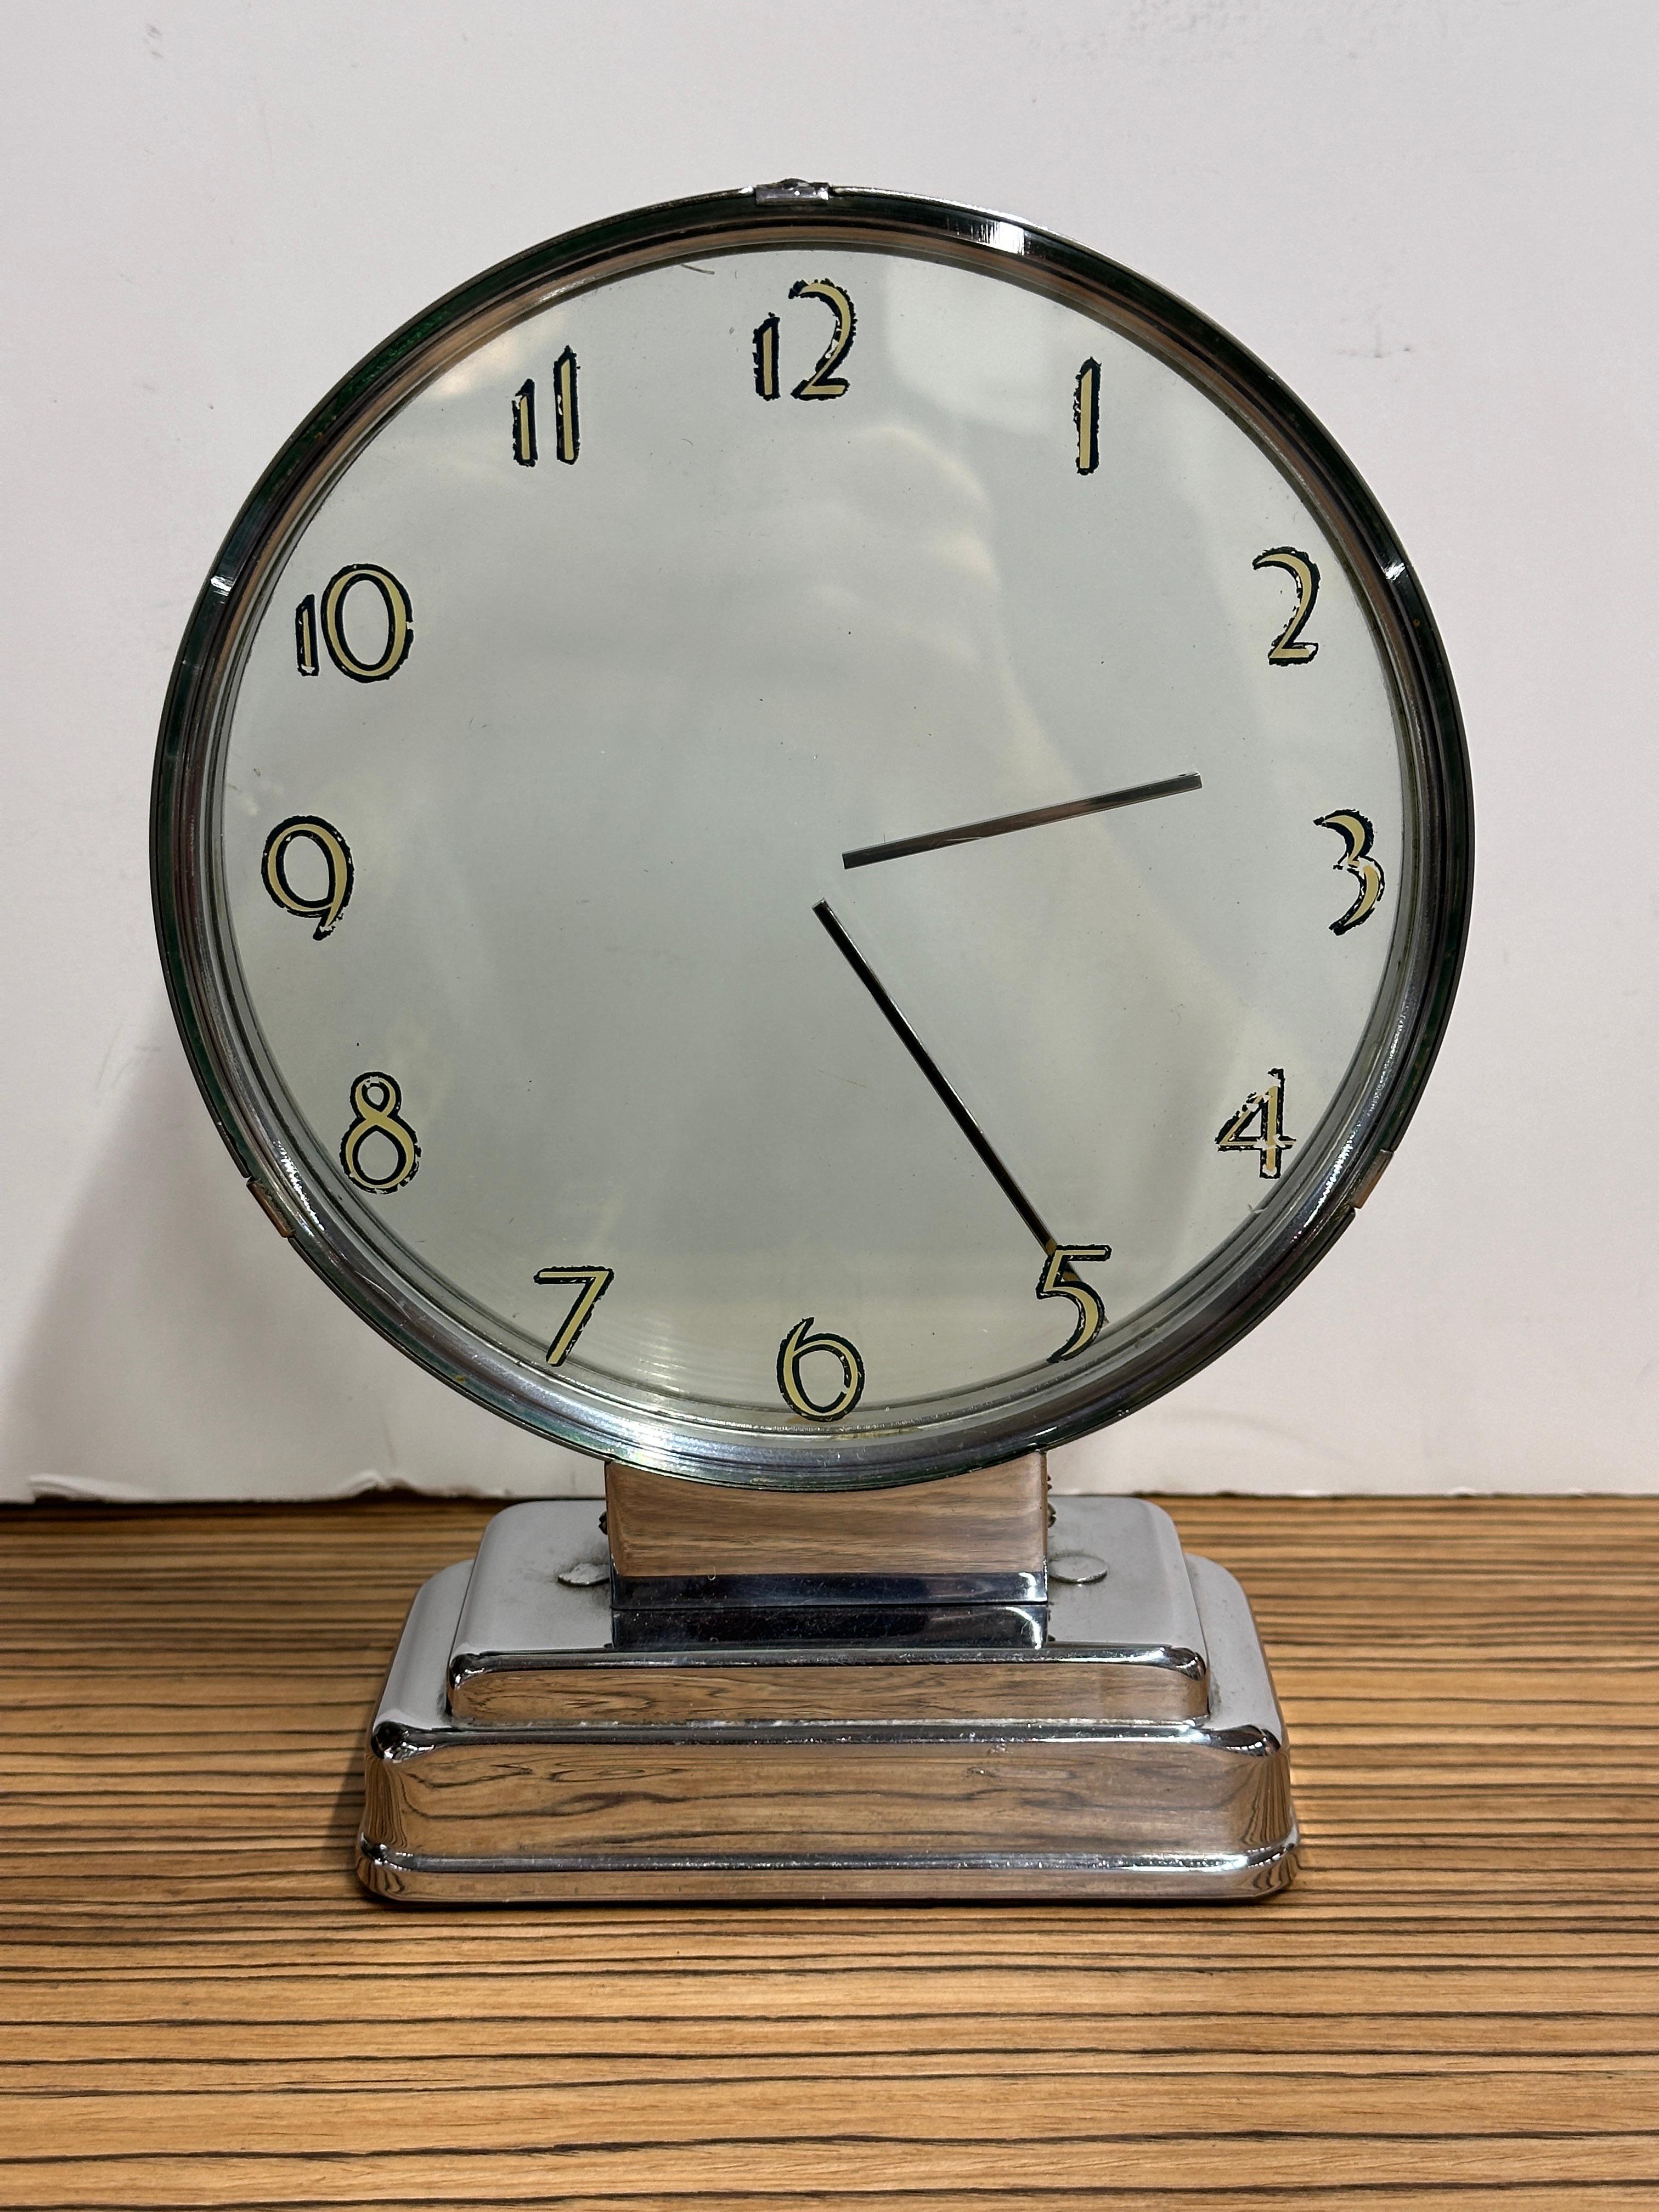 A stunning clock design by Etalage Reclame. The clock dates to the early 1940’s or late 1930’s. It is mystery clock. It has two disks inside with hands affixed to the plates that rotate. There is an outside disc on front with the numbers stenciled